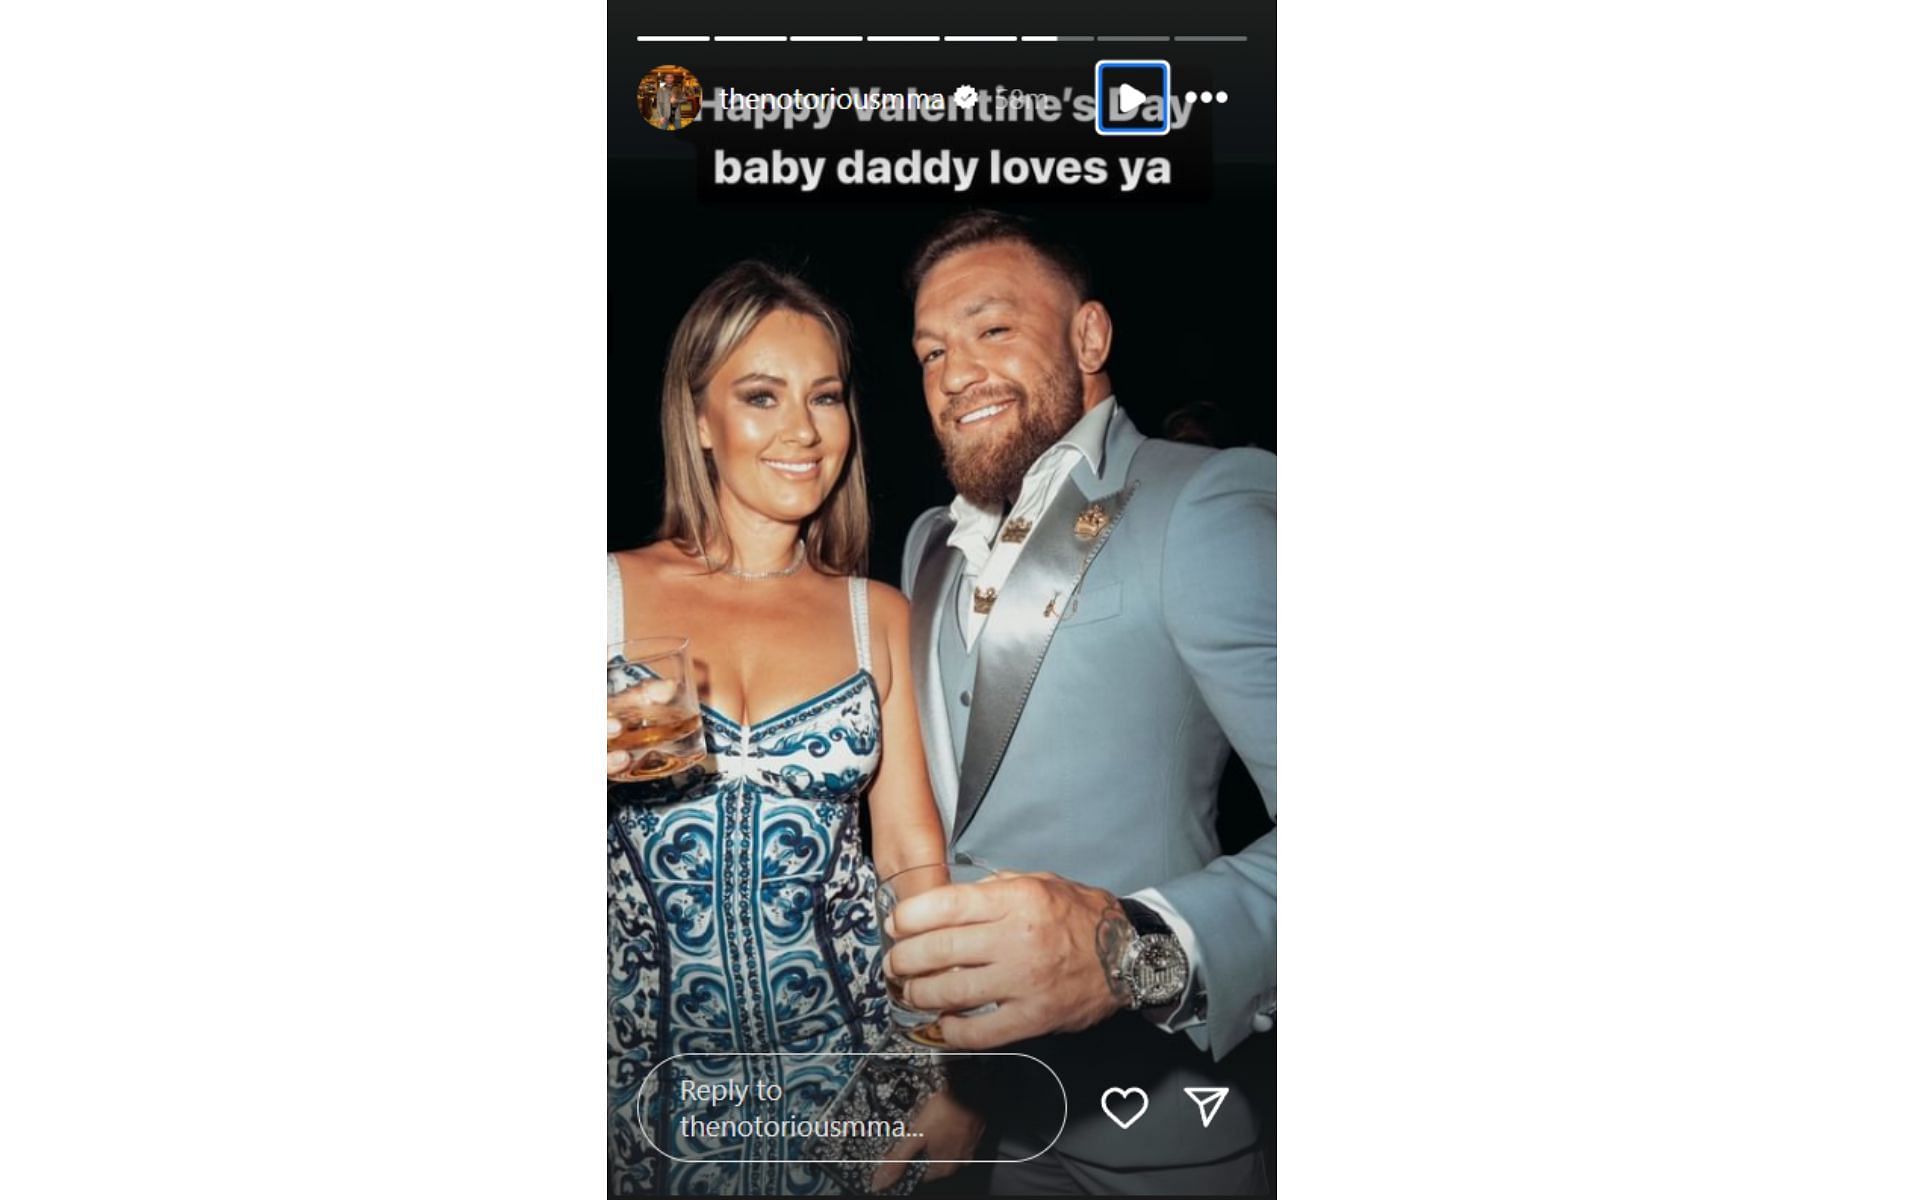 Screenshot from @thenotoriousmma on Instagram